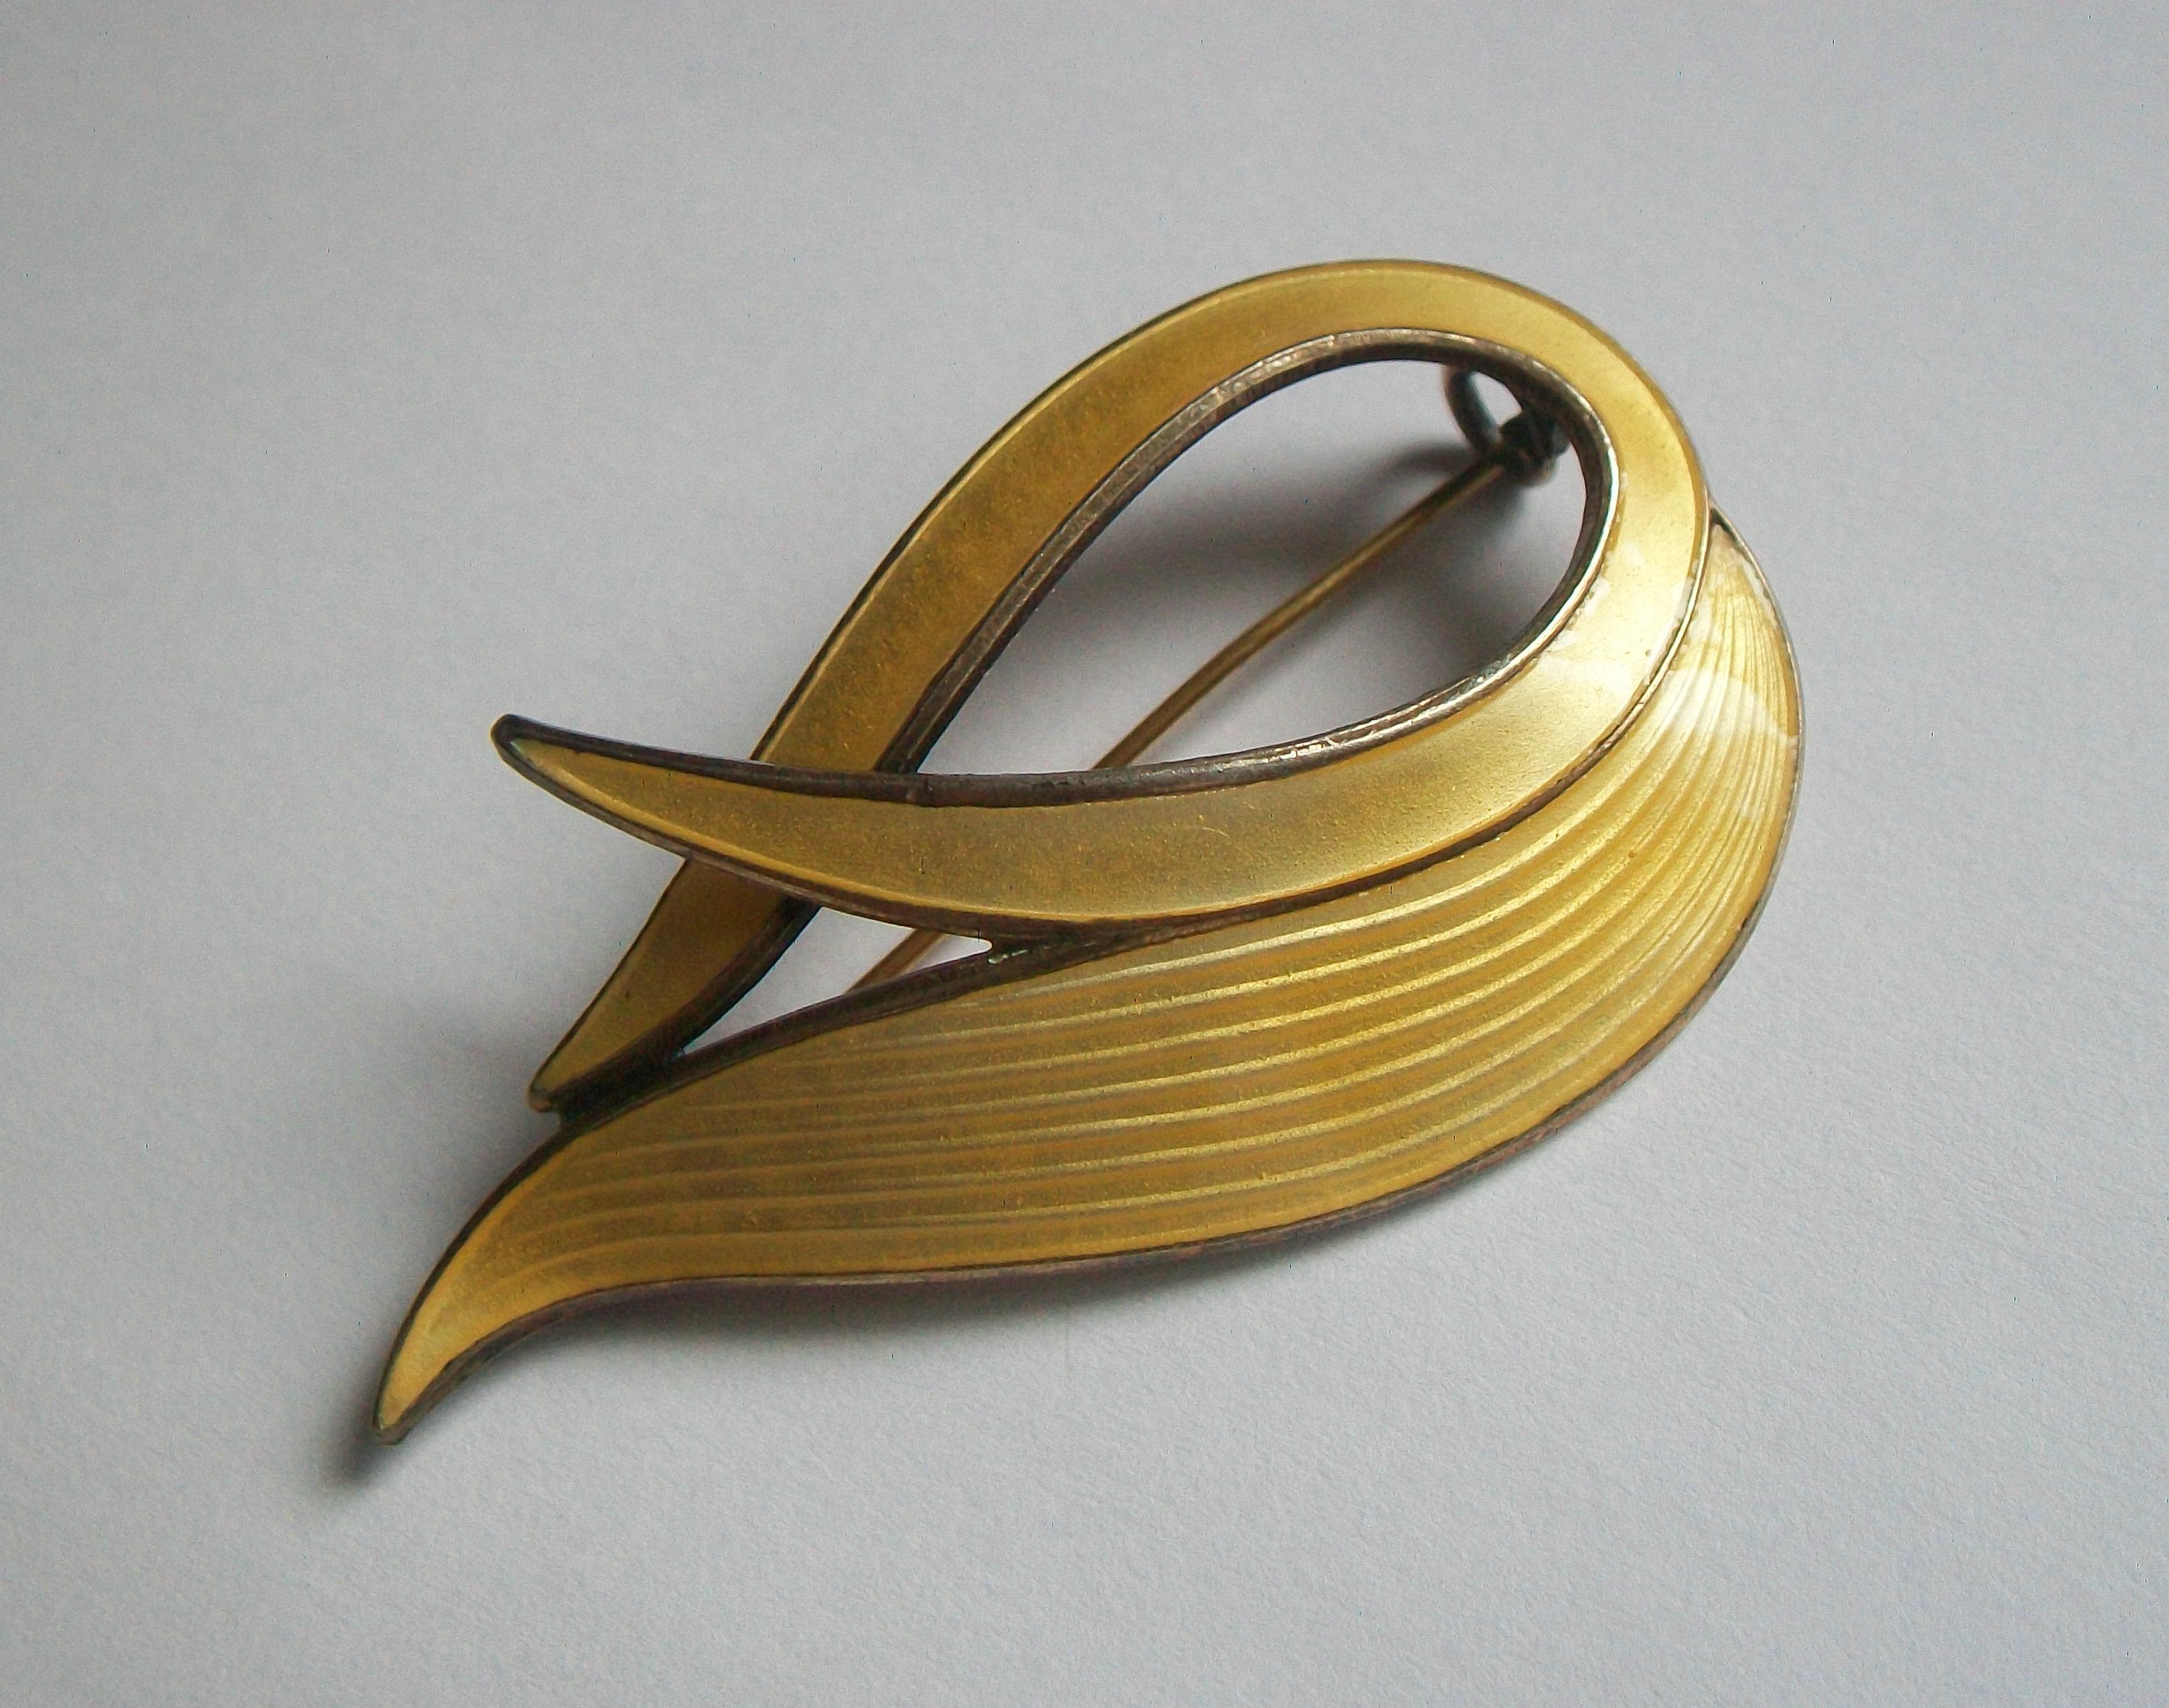 ALBERT SCHARNING - Modernist yellow guilloché enamel and sterling silver pin or brooch - fine quality workmanship and detail - signed A.Sch 925 S on the back - Norway (Oslo) - mid 20th century.

Excellent vintage condition - all original - no loss -